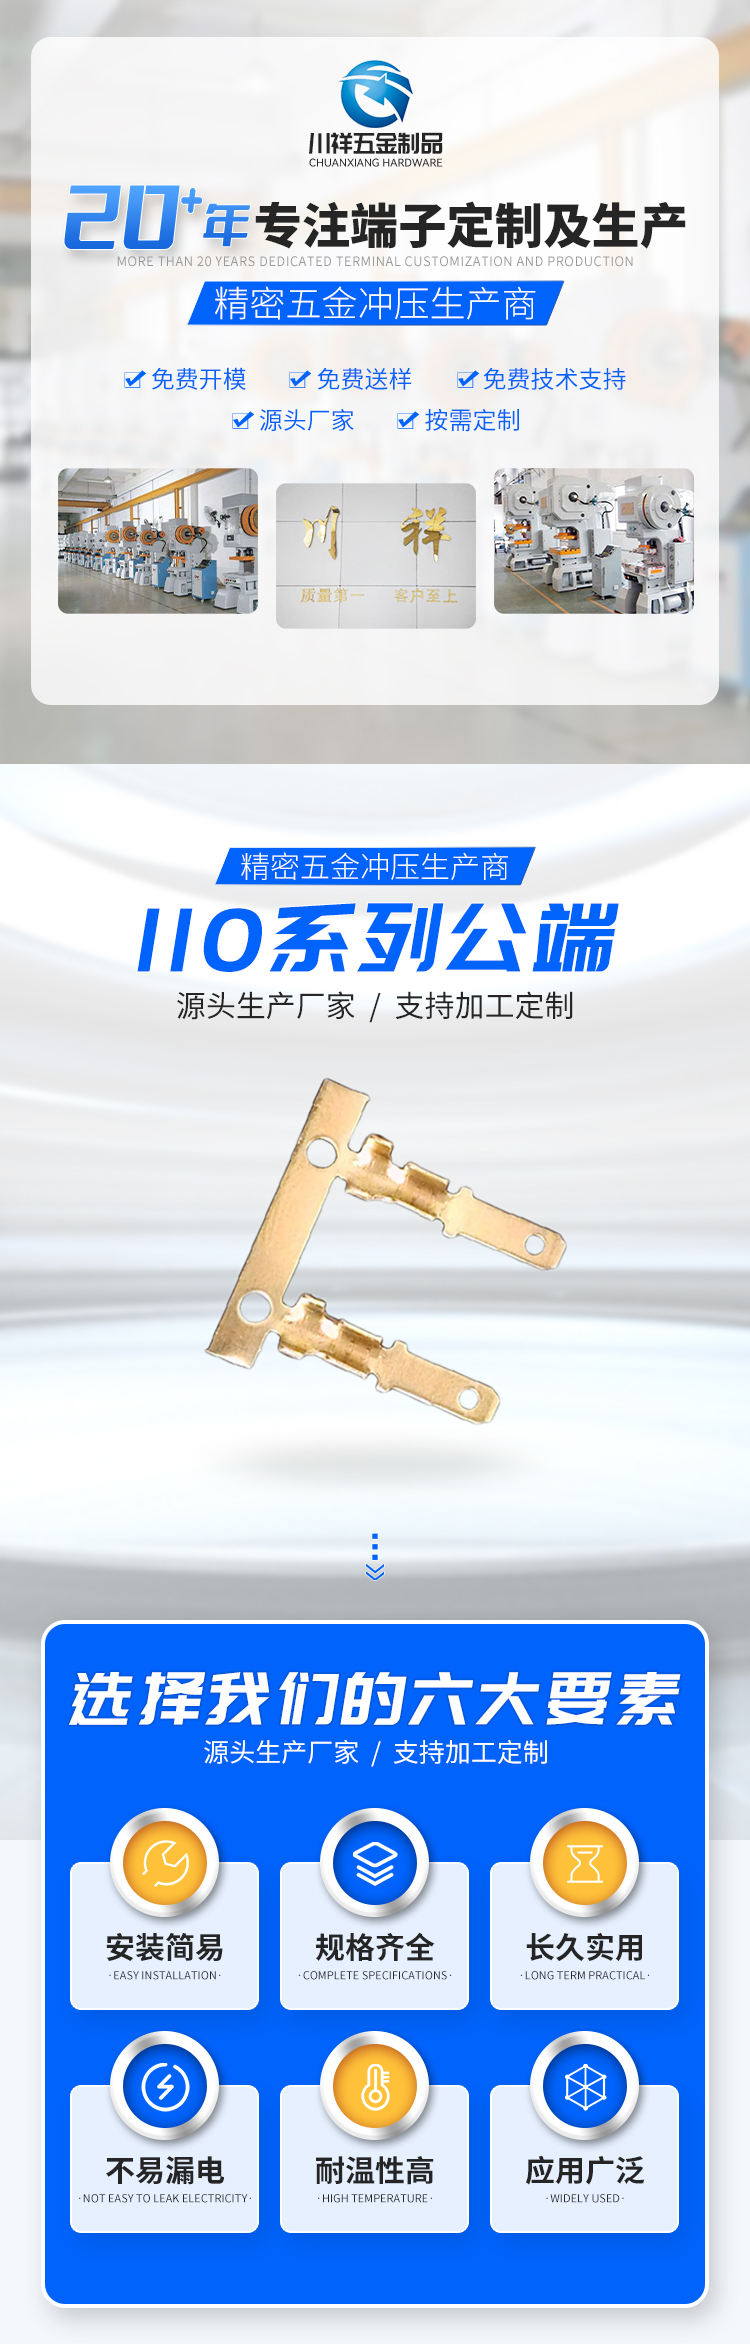 Chuanxiang connector terminal electronic component connector 8545B copper terminal focuses on customized production